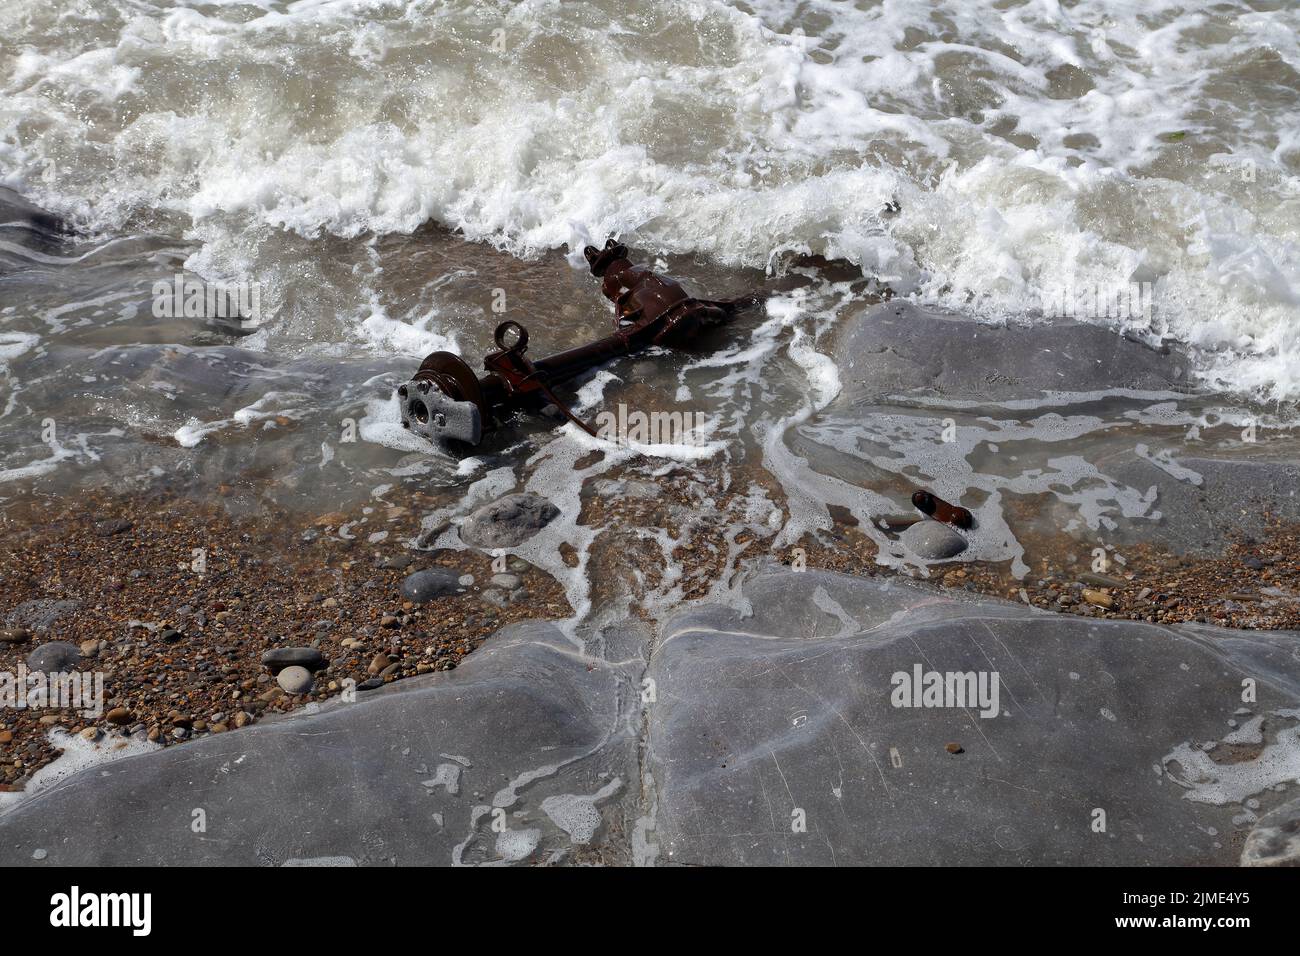 The mangled rear axle of a car stranded on the beach being washed over by the incoming tide. Stock Photo